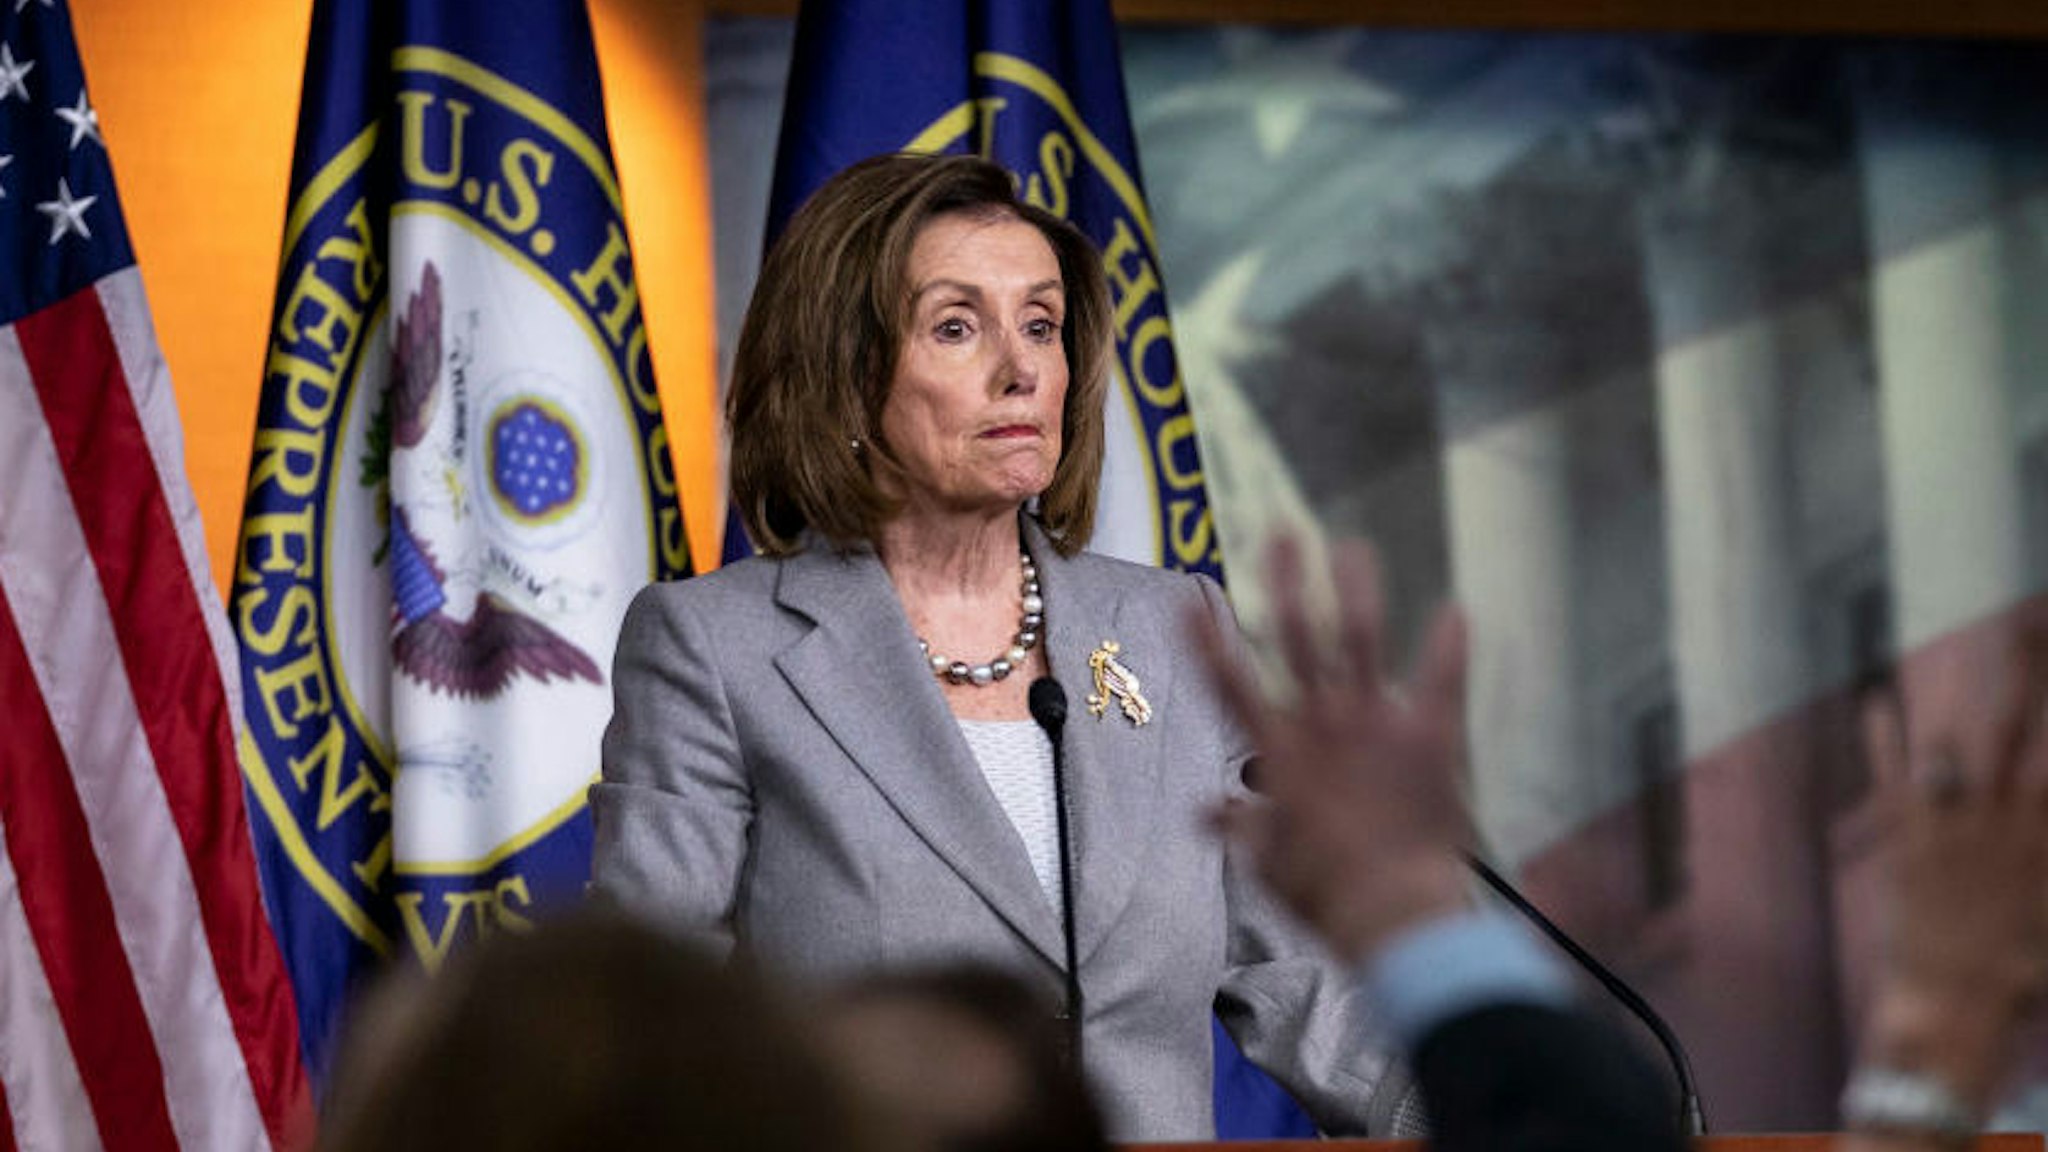 Speaker of the House Nancy Pelosi (D-CA) takes questions during her weekly news conference on Capitol Hill December 12, 2019 in Washington, DC. Pelosi fielded multiple questions about the impeachment inquiry. The articles of impeachment charge President Trump with abuse of power and obstruction of Congress. House Democrats claim that Trump posed a 'clear and present danger' to national security and the 2020 election in his dealings with Ukraine over the past year. (Photo by Drew Angerer/GettyImages)